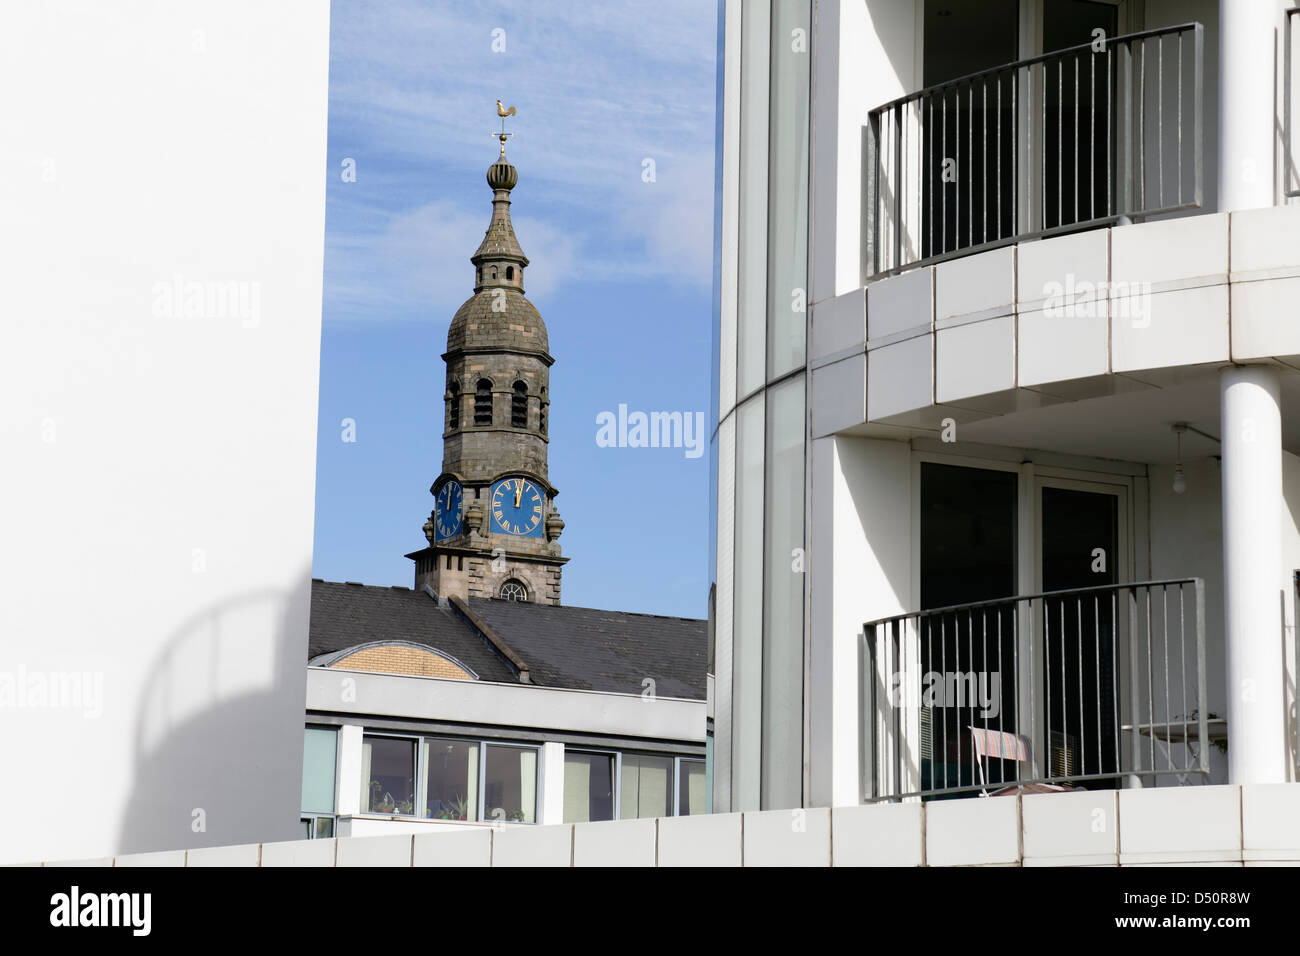 The clock steeple of St Andrew's in the Square Church viewed between modern  buildings in Glasgow, Scotland, UK Stock Photo